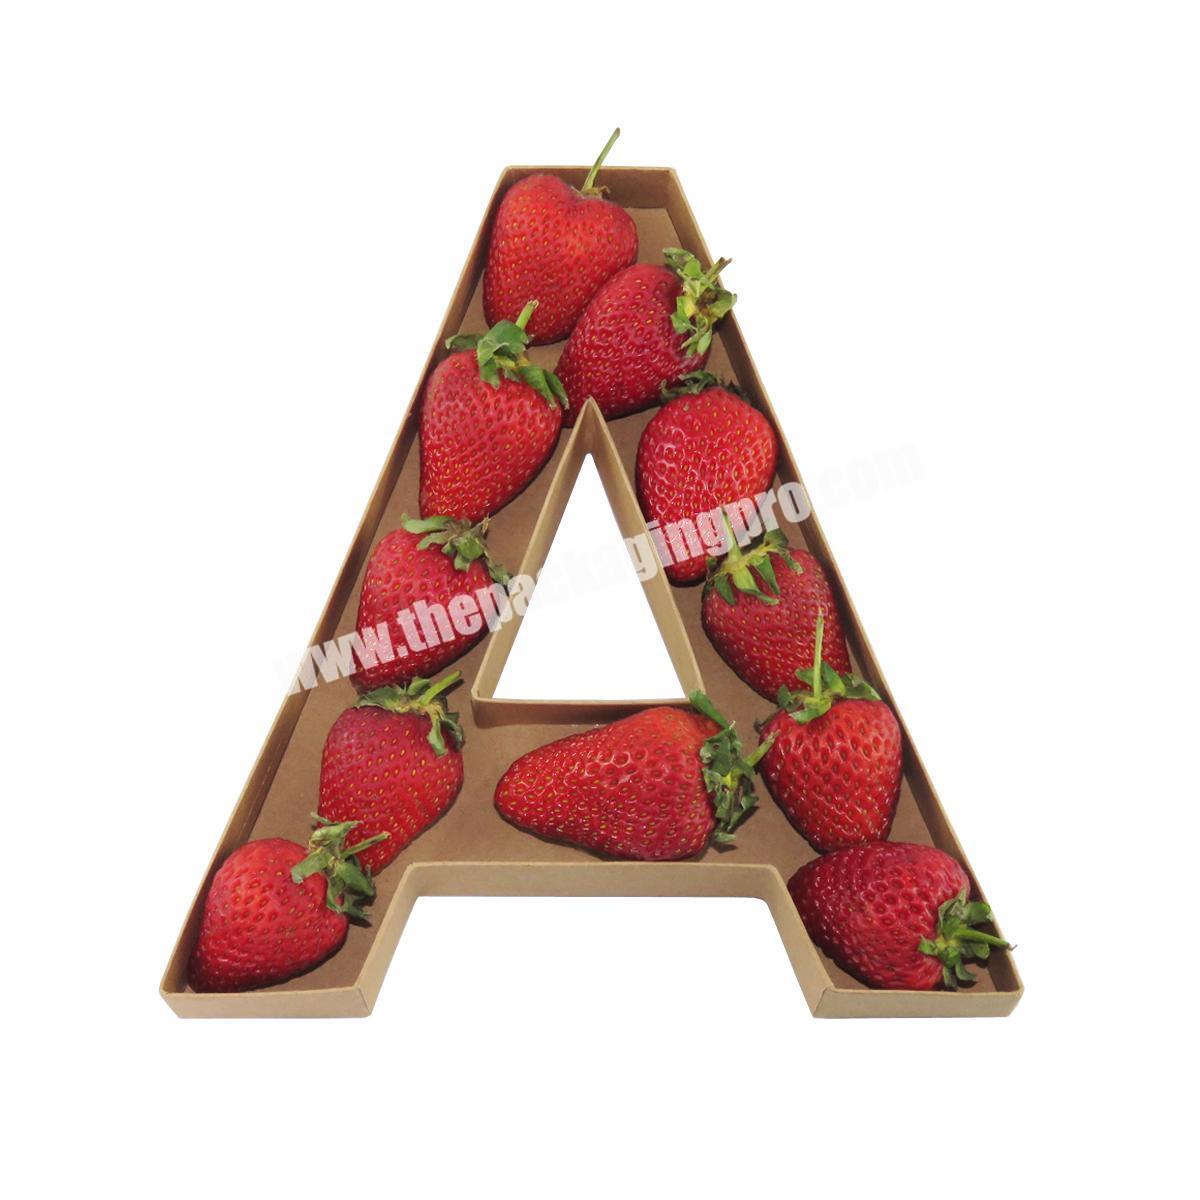 26 Letters Shaped Paper Display Gift Wedding Seed Cake Packaging Chocolate Covered Strawberries Box